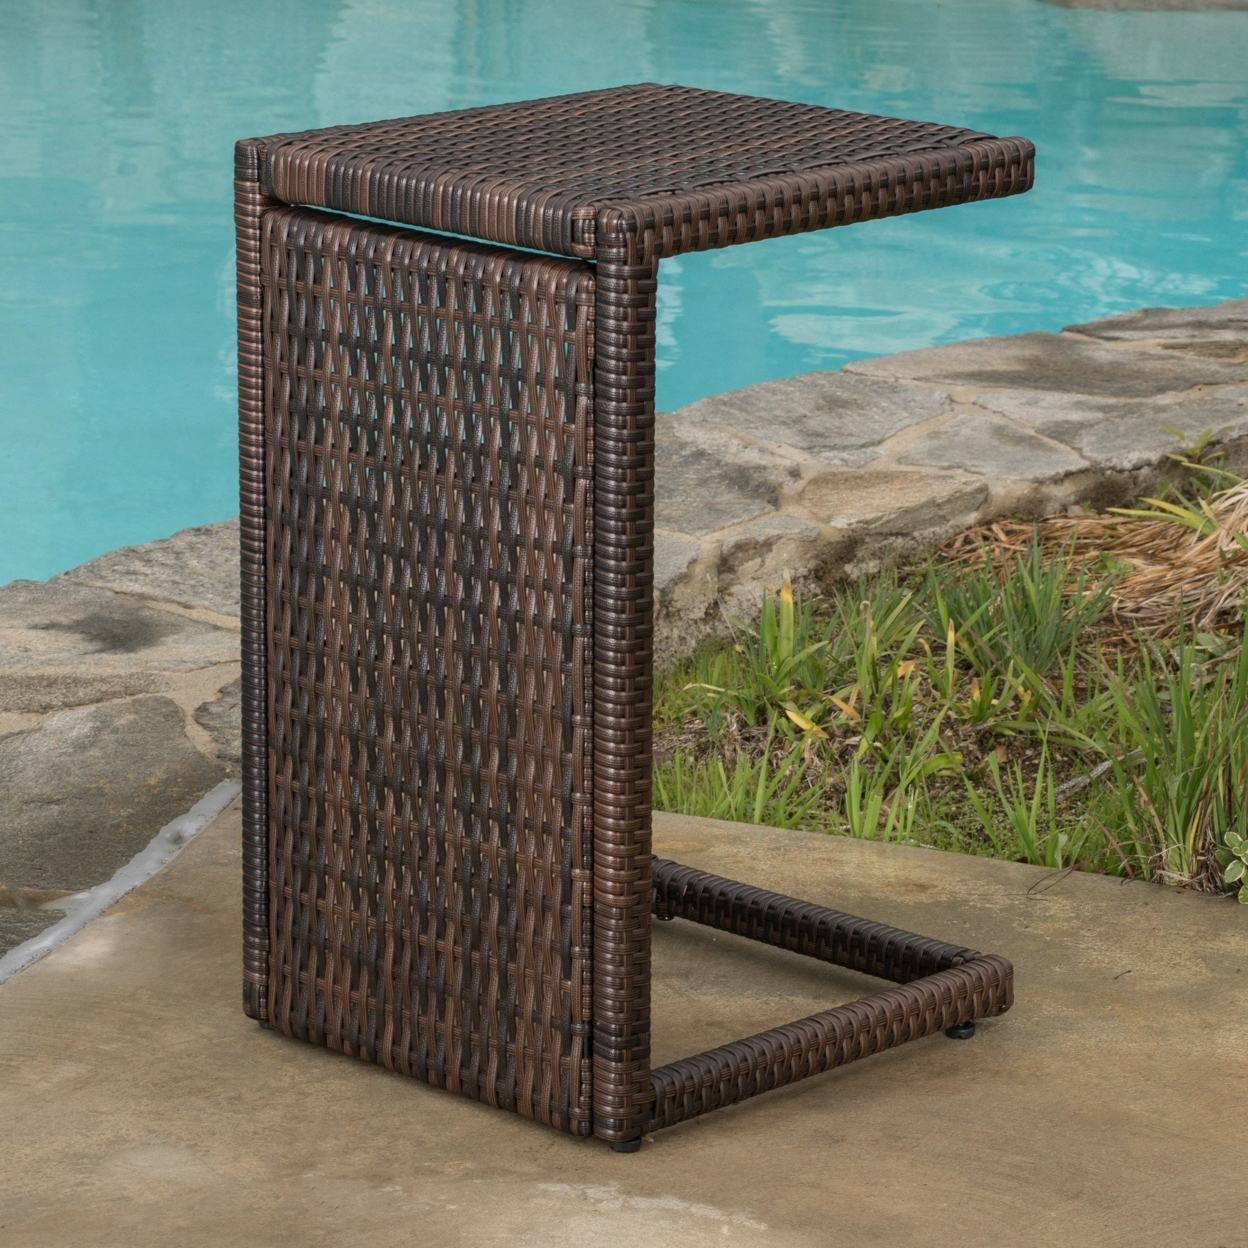 Lakeport Wicker Chaise Lounge With Wicker Side Table